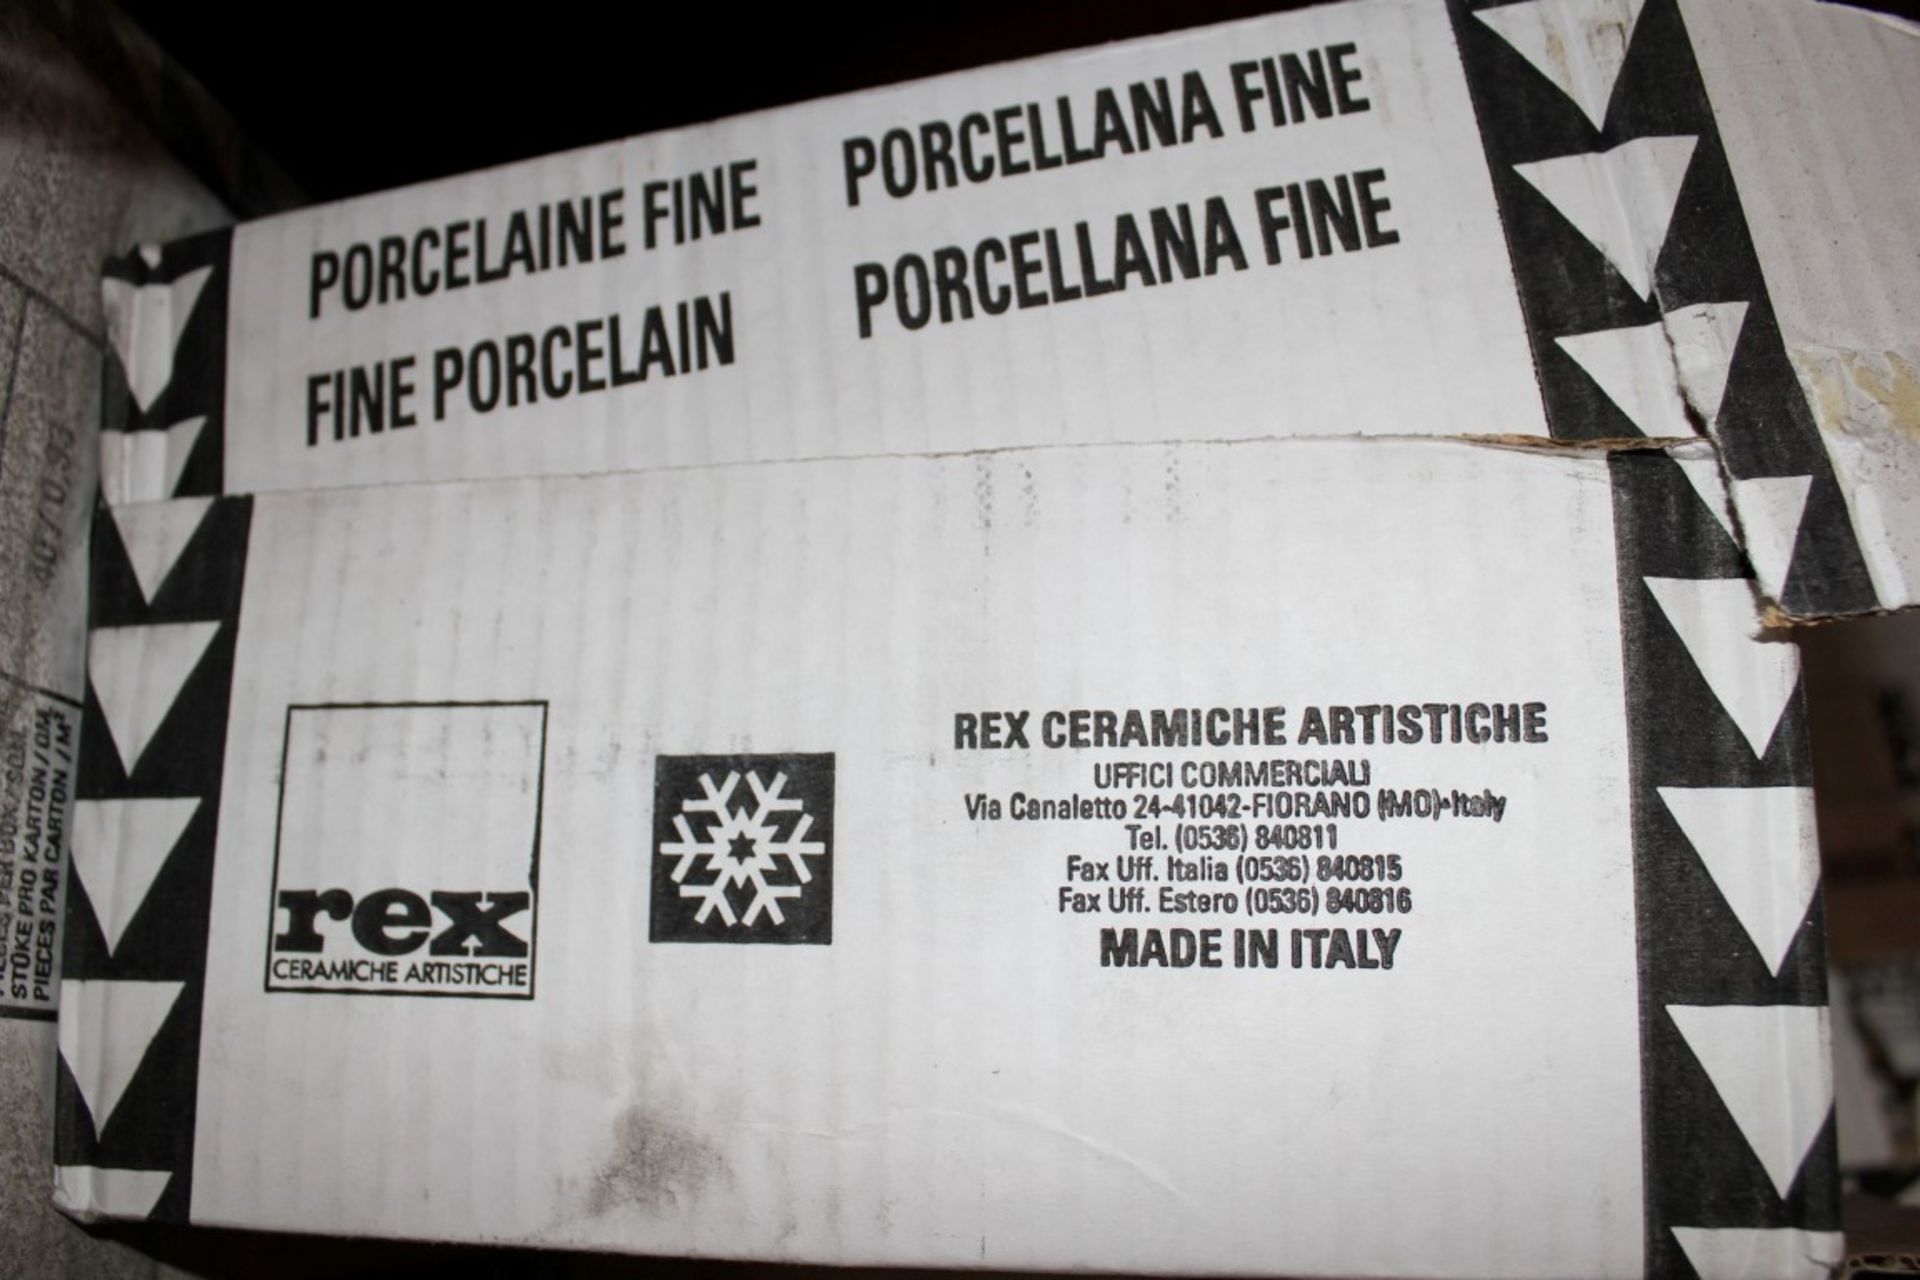 16 x Boxes of Rex Ceramiche Artistiche Wall Tiles - Lot Includes 16 Boxes of 40 Tiles - Tile Size 15 - Image 3 of 5